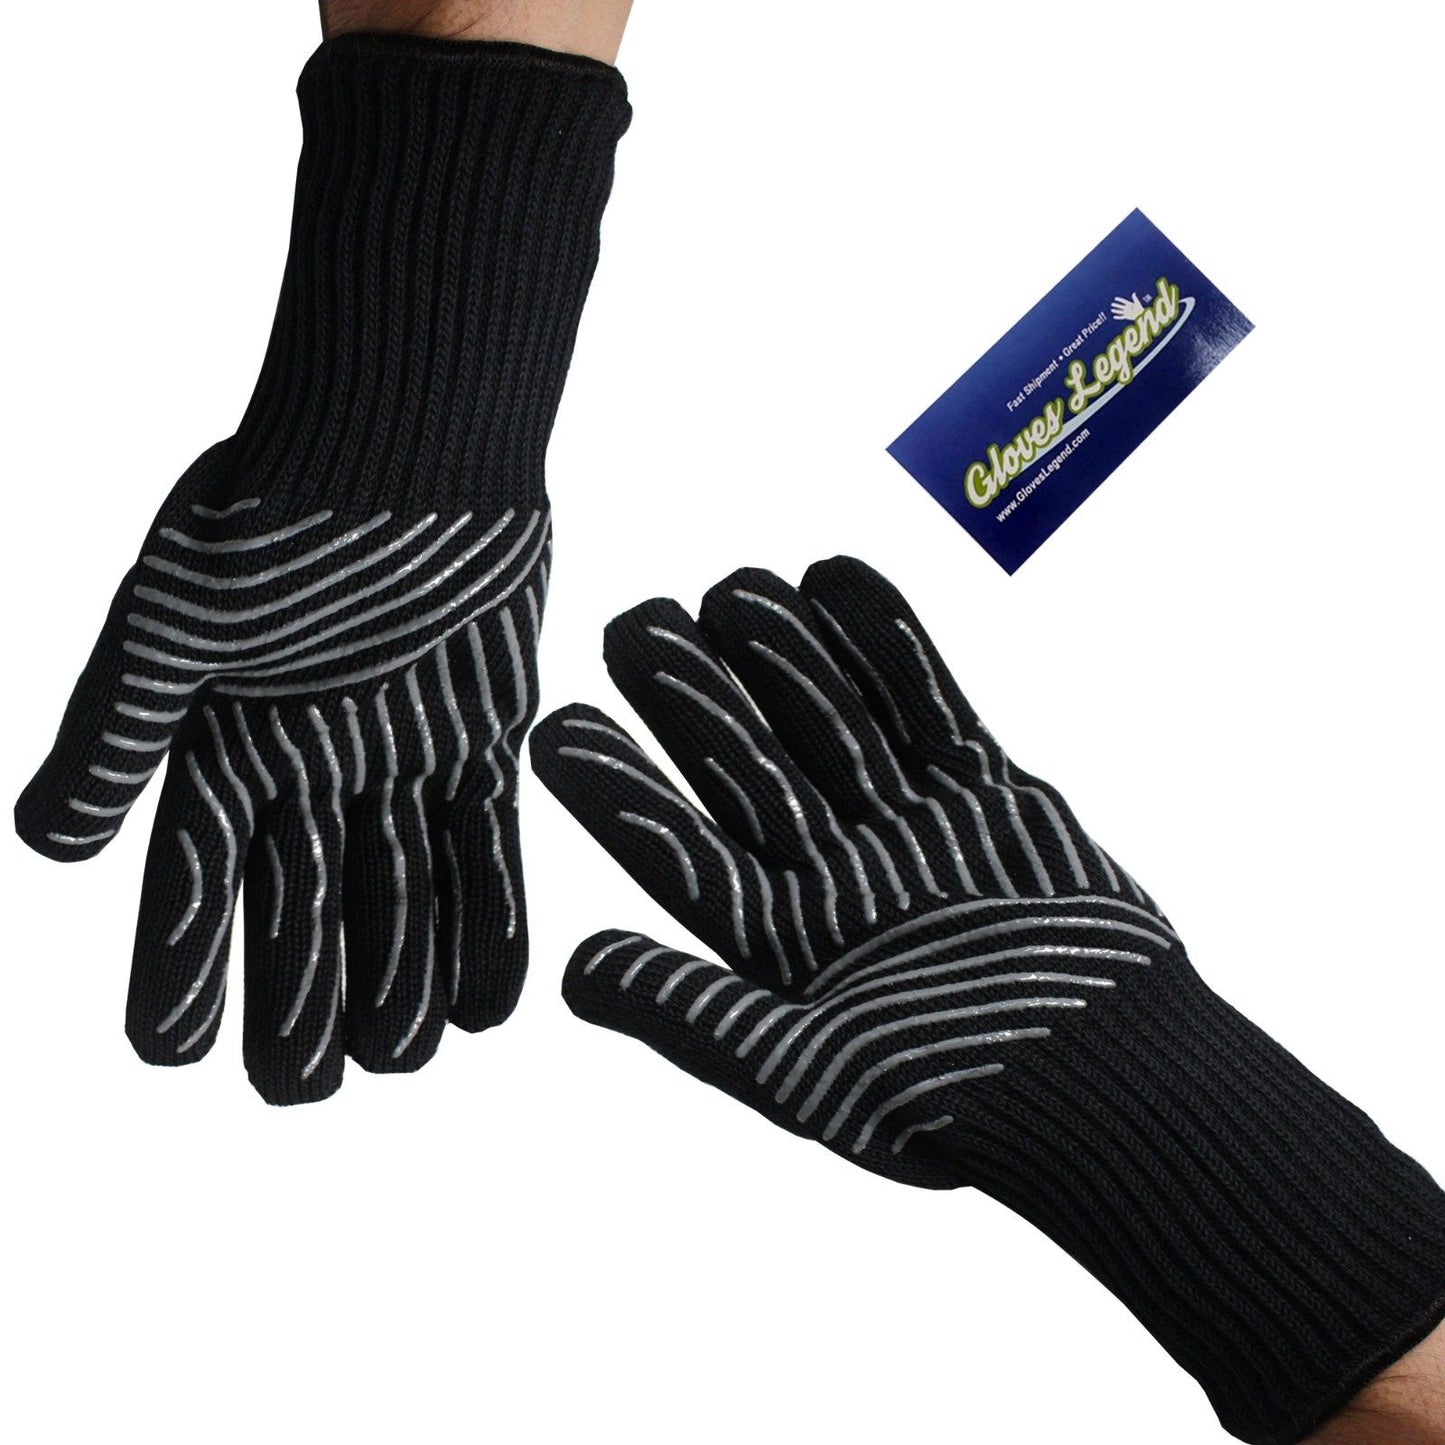 1 Pair (2 Gloves) Gloves Legend Extra Long Cuff Oven Mitts Heat Resistant Grill BBQ Barbecue Cooking Gloves